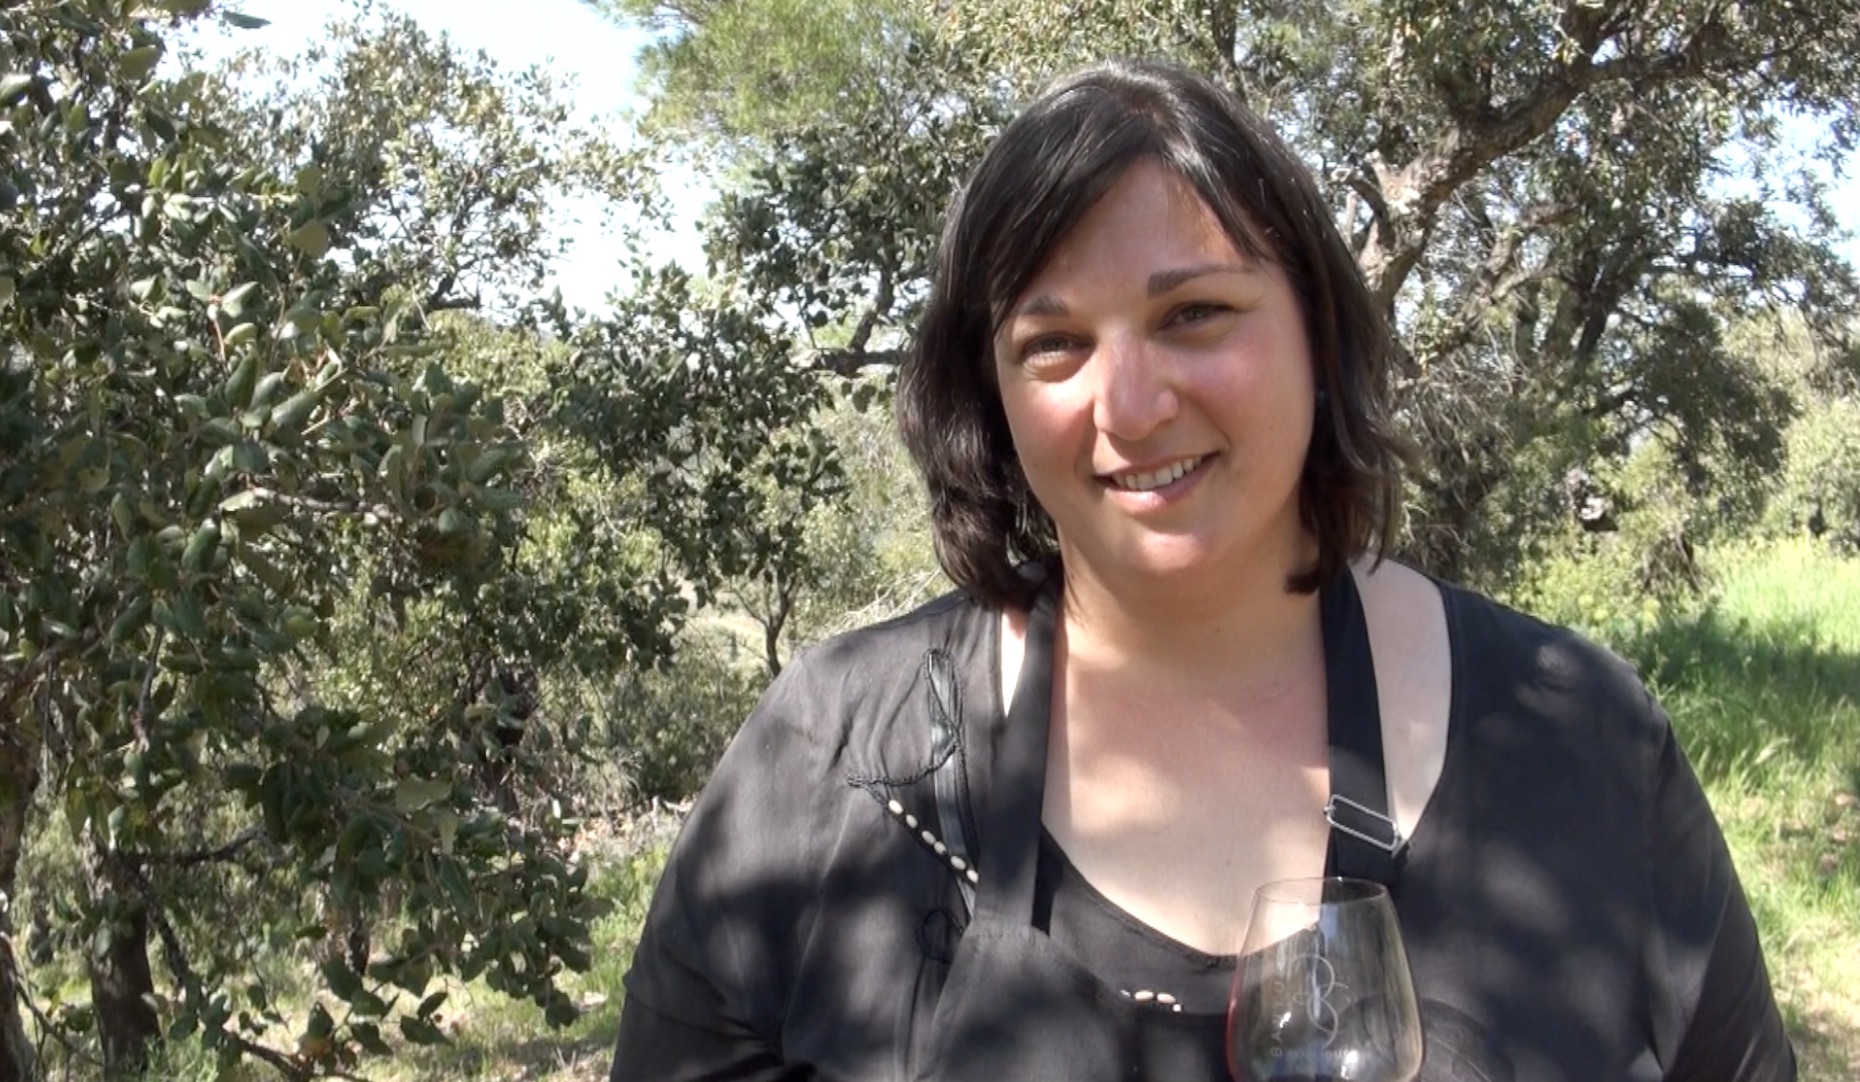 Why You Should Seriously Consider Purchasing Old Vineyards In SW France According To Elise Gaillard